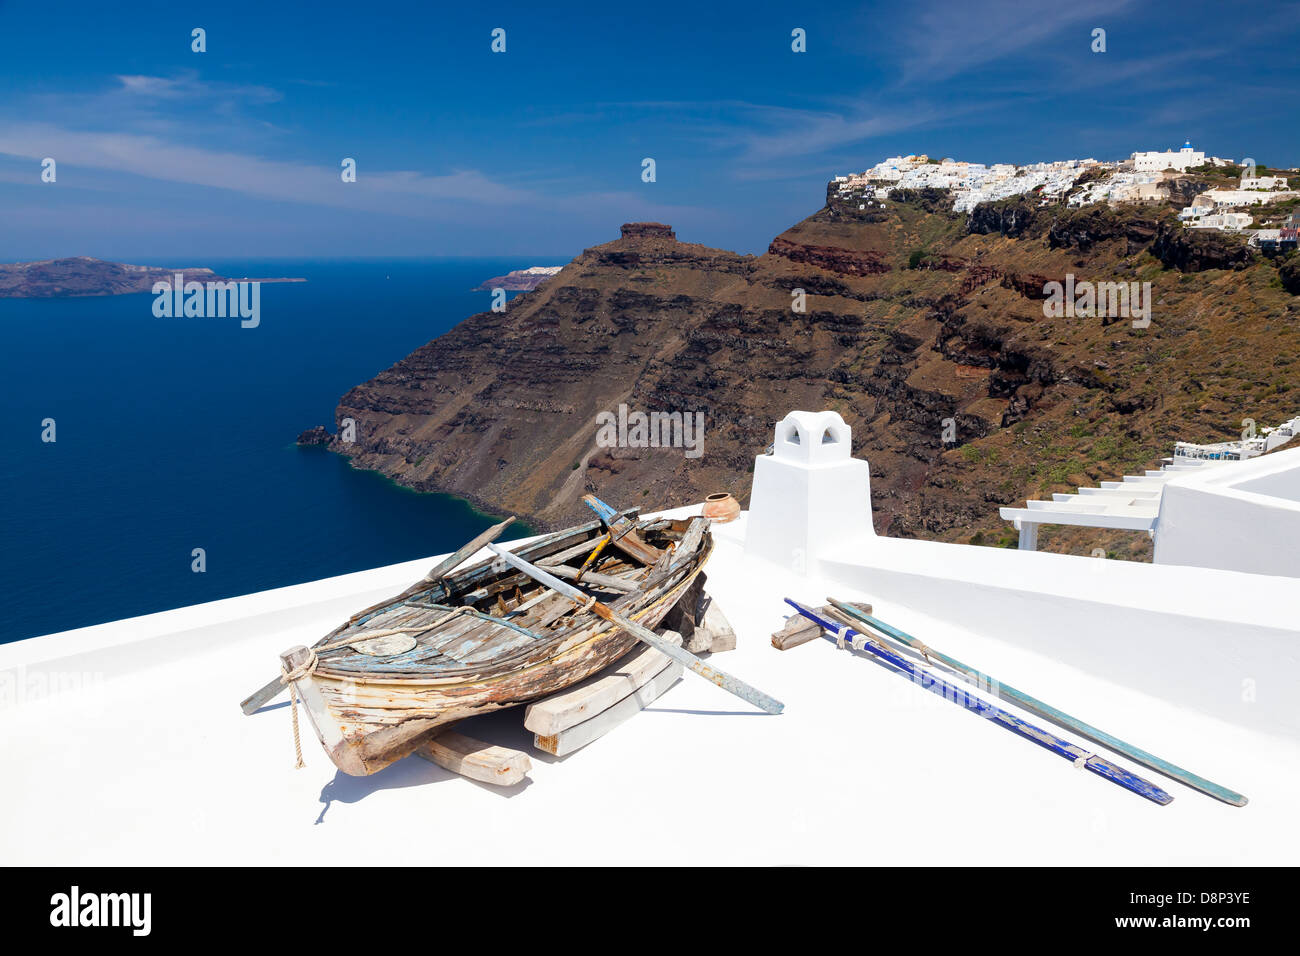 Boat on a roof at Firostefani near Fira Santorini Greece. In the background is Skaros Rock at Imerovigli. Stock Photo